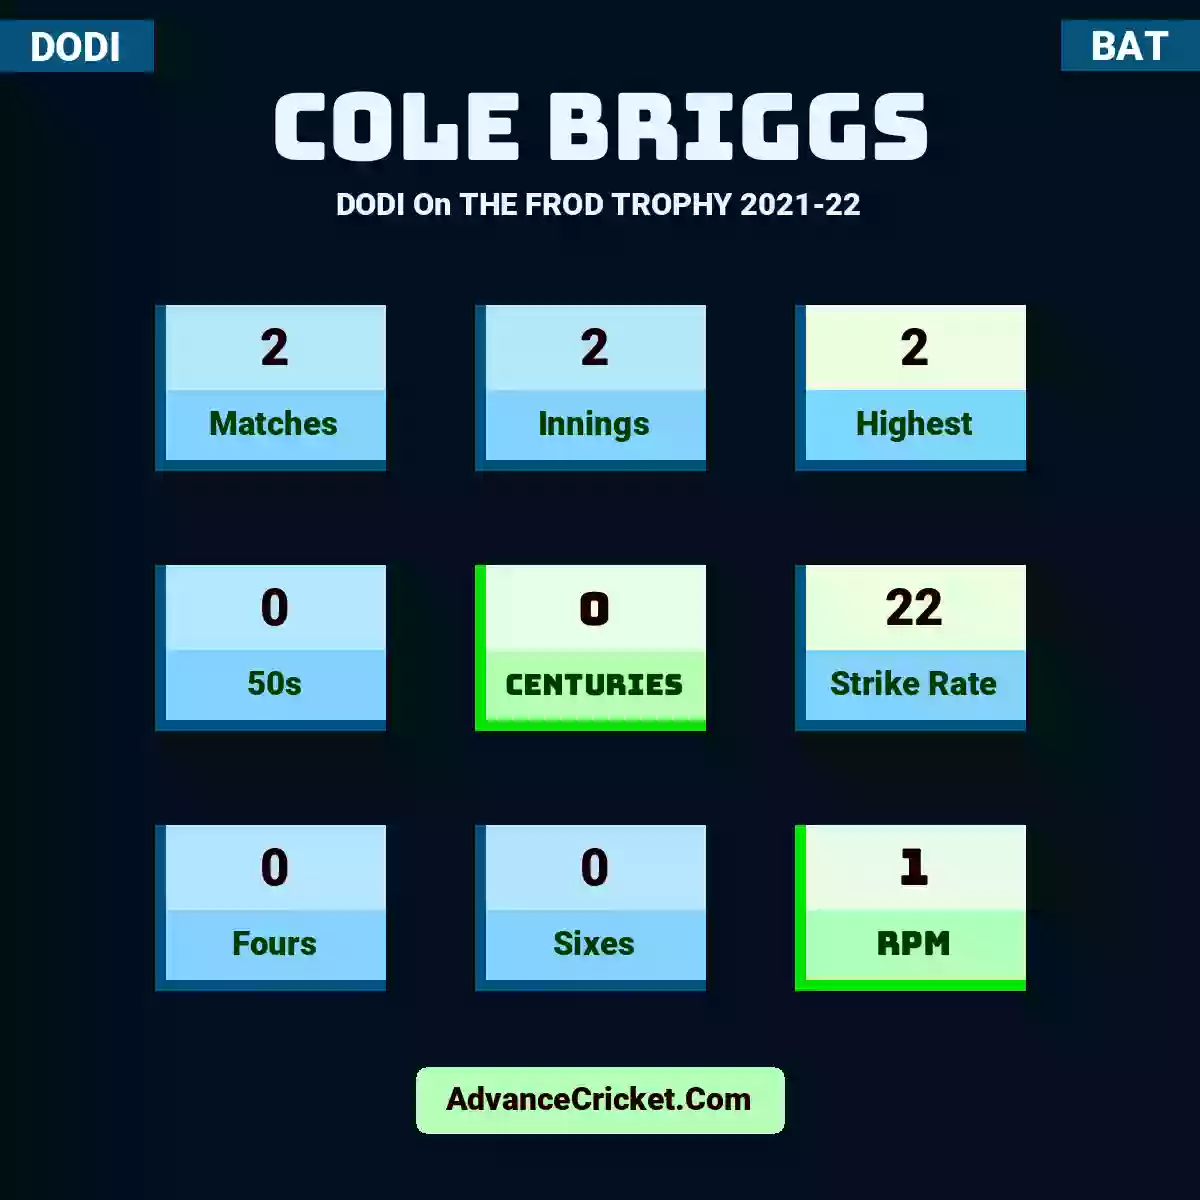 Cole Briggs DODI  On THE FROD TROPHY 2021-22, Cole Briggs played 2 matches, scored 2 runs as highest, 0 half-centuries, and 0 centuries, with a strike rate of 22. C.Briggs hit 0 fours and 0 sixes, with an RPM of 1.